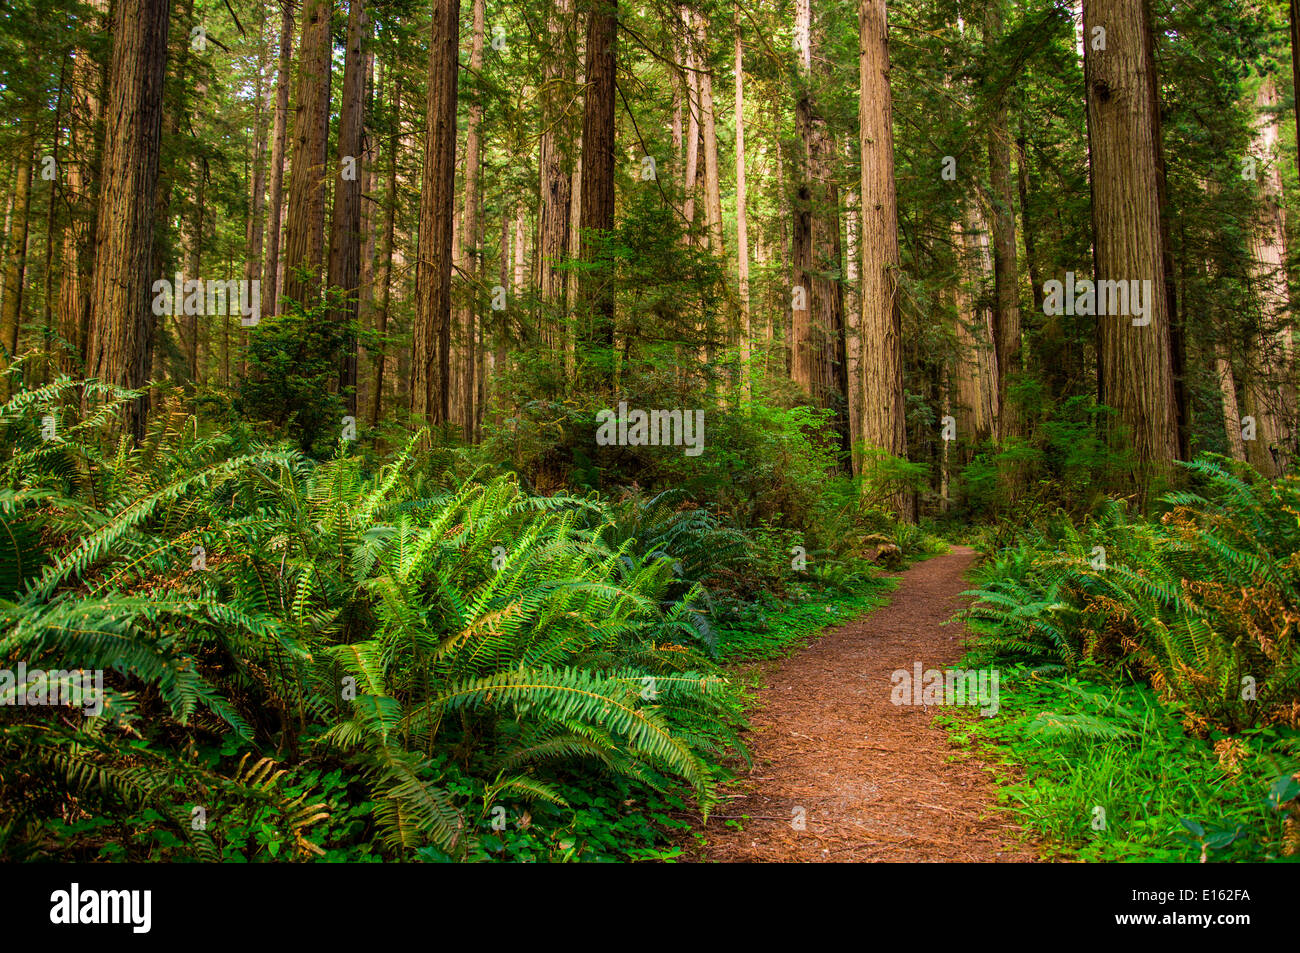 Giant trees and a hiking Path in Redwood Forest Stock Photo